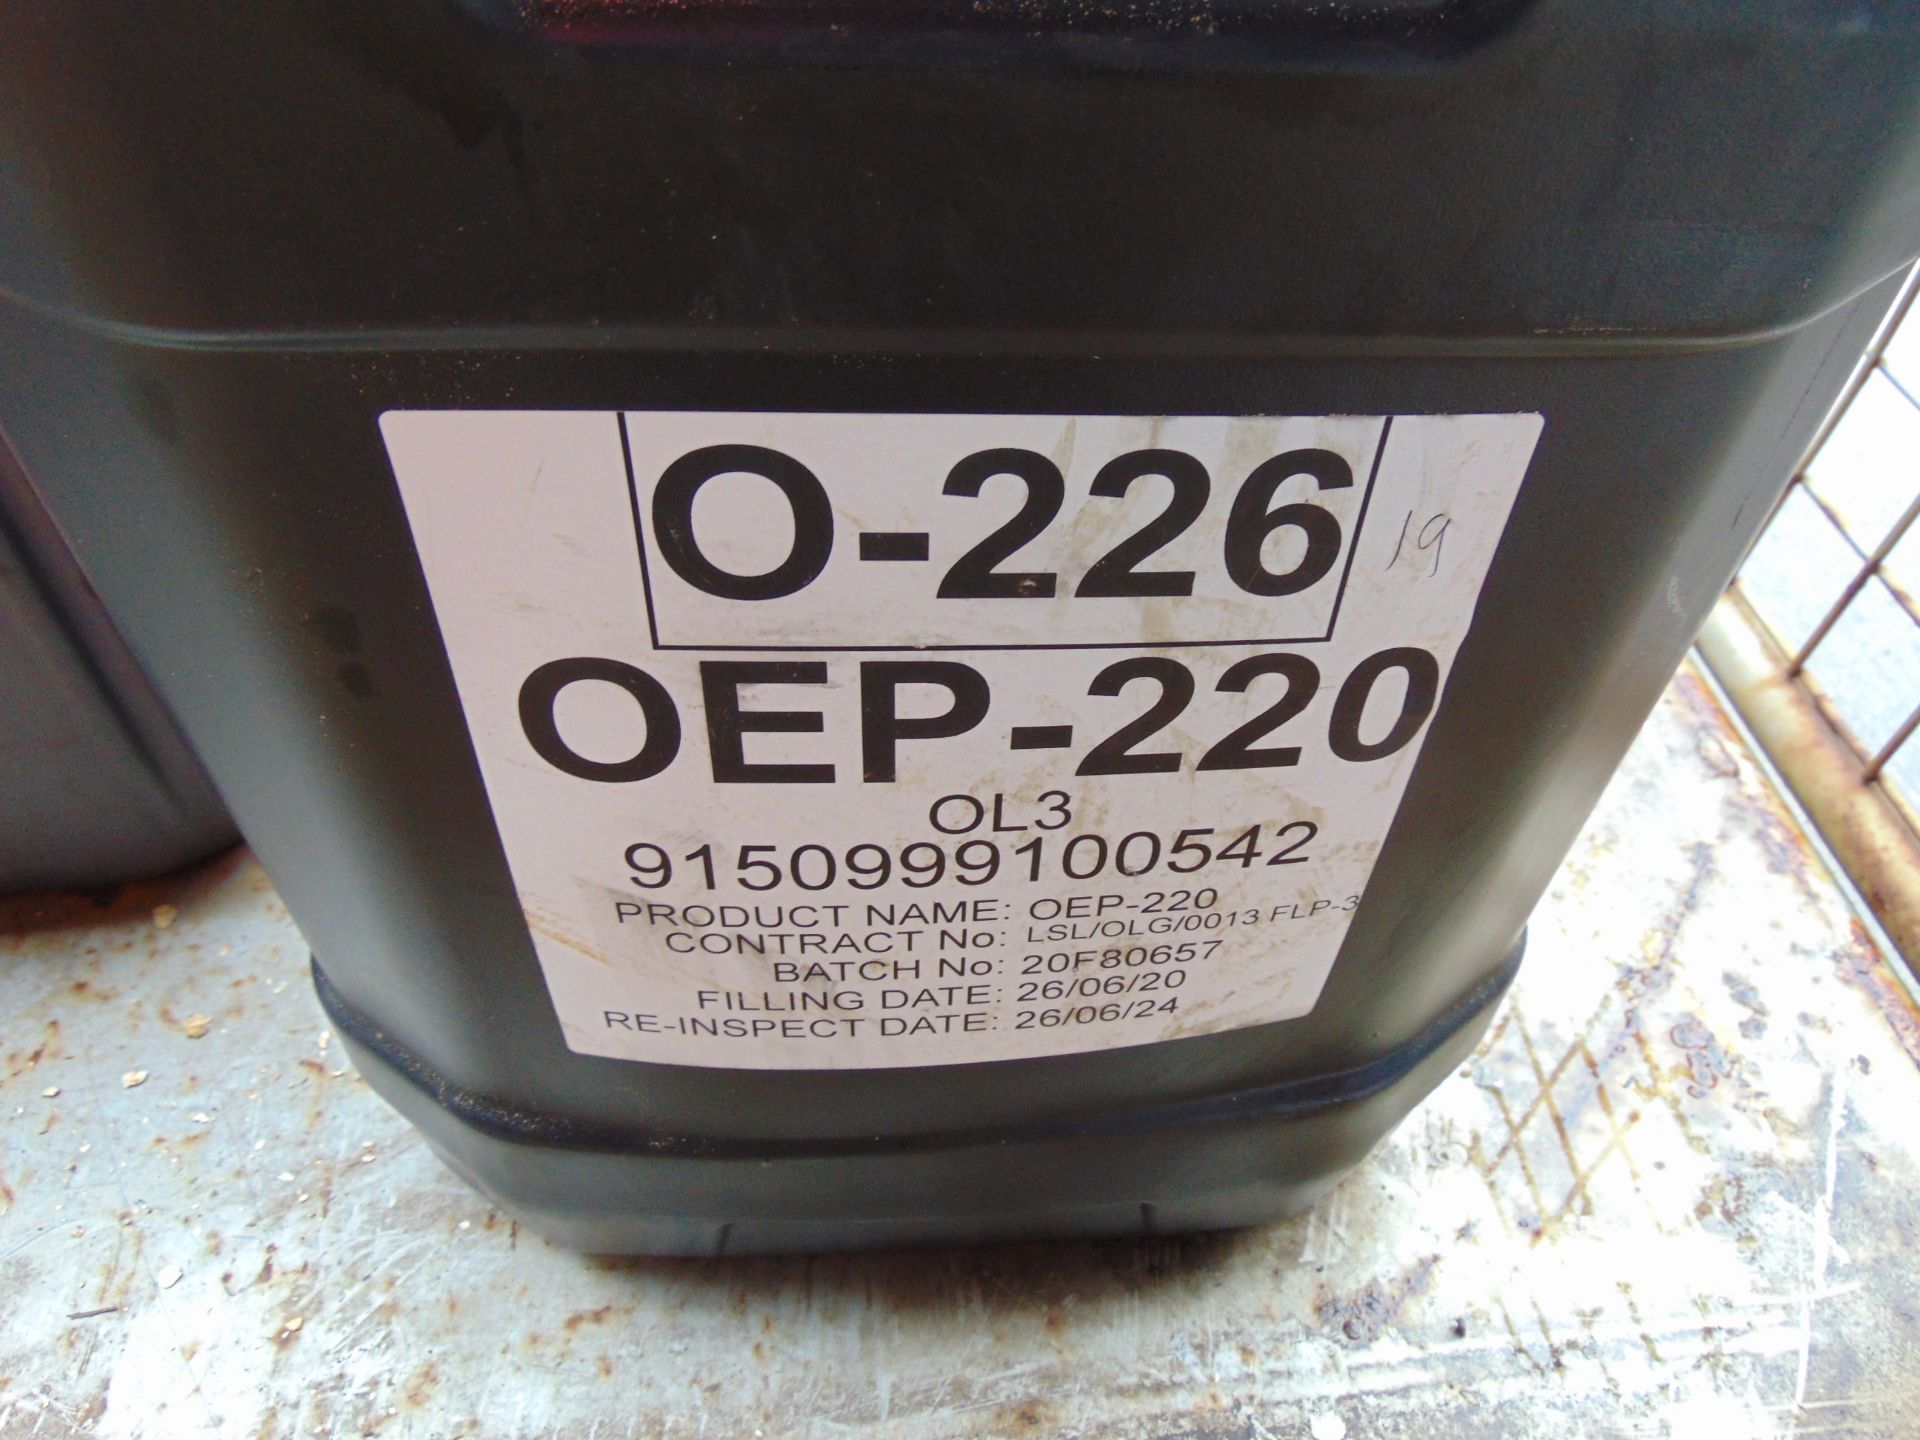 1 x 20 Litre Drum of OEP220 Extreme High Pressure Gear Oil, New Unissued MoD Reserve Stocks - Image 2 of 3